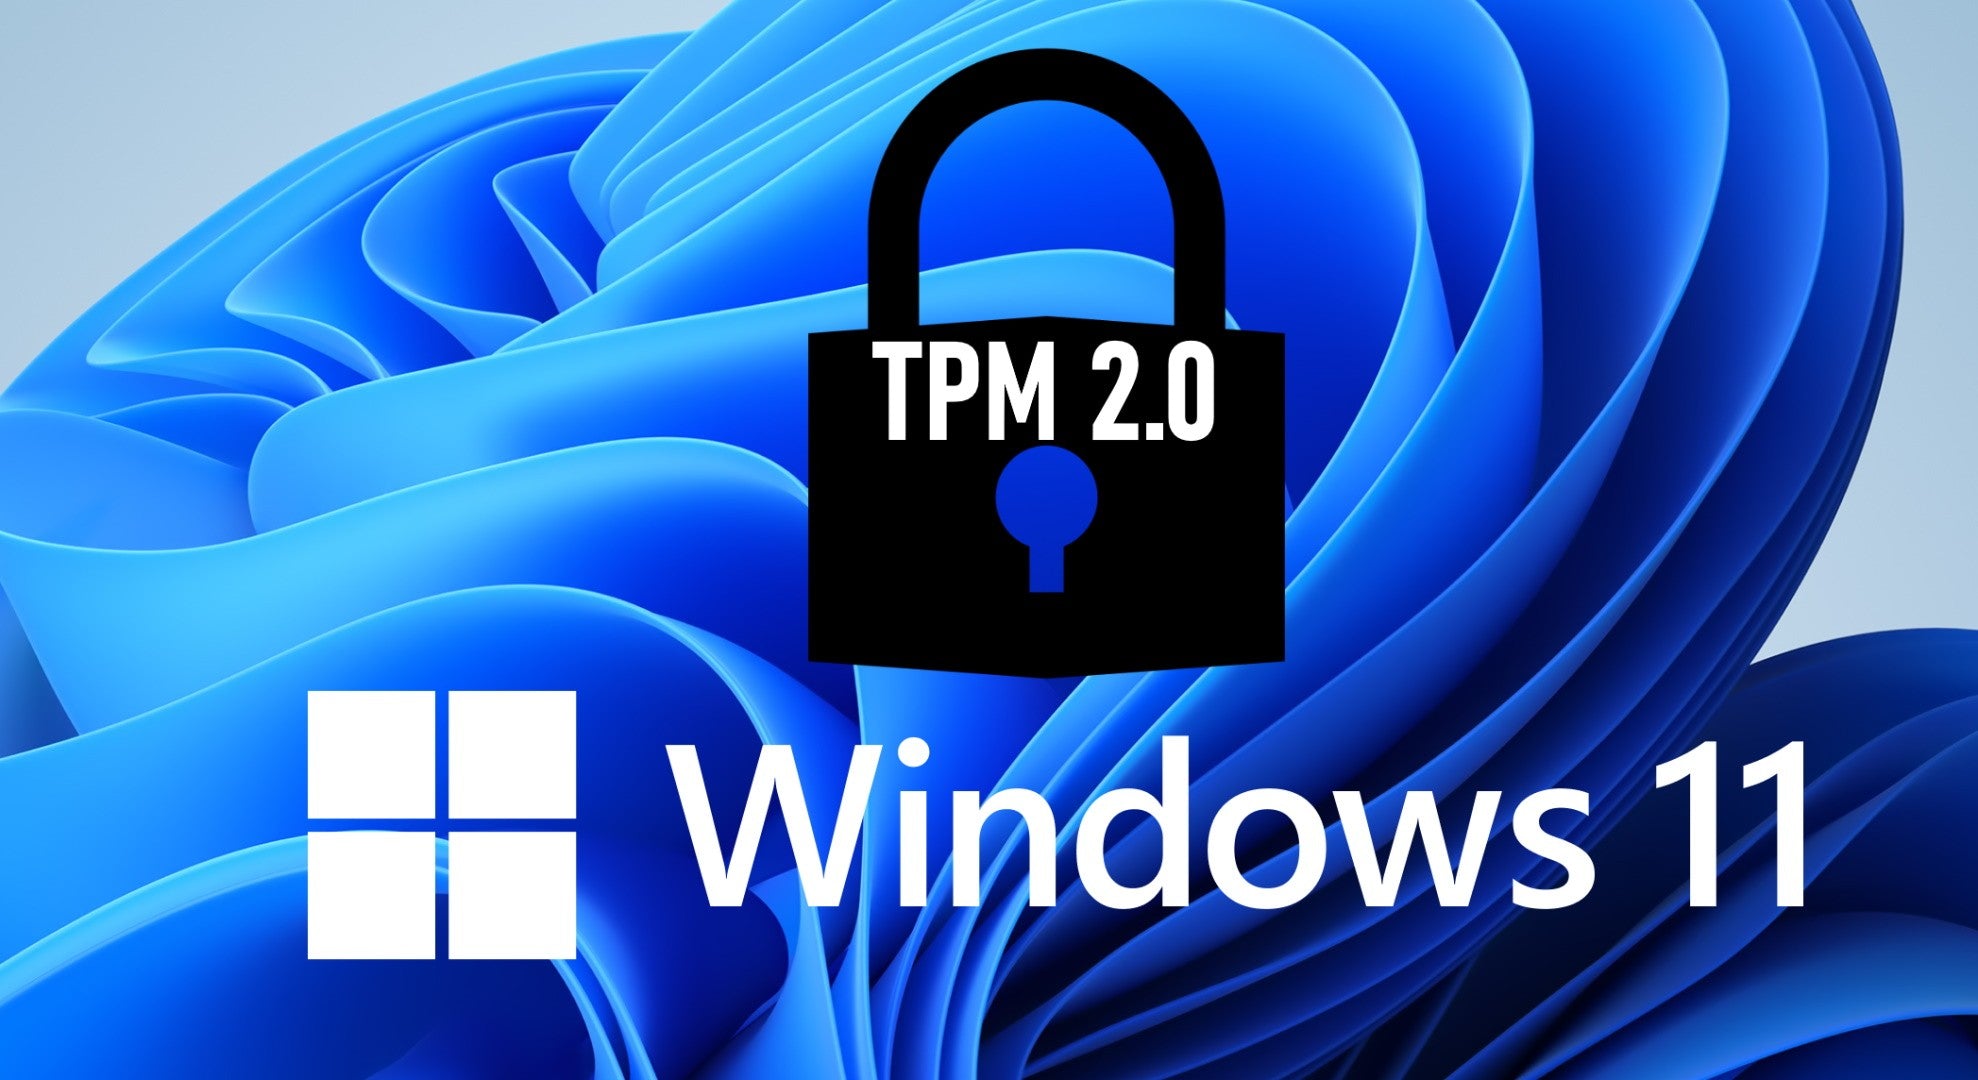 Why Does Windows 11 Need TPM 2.0